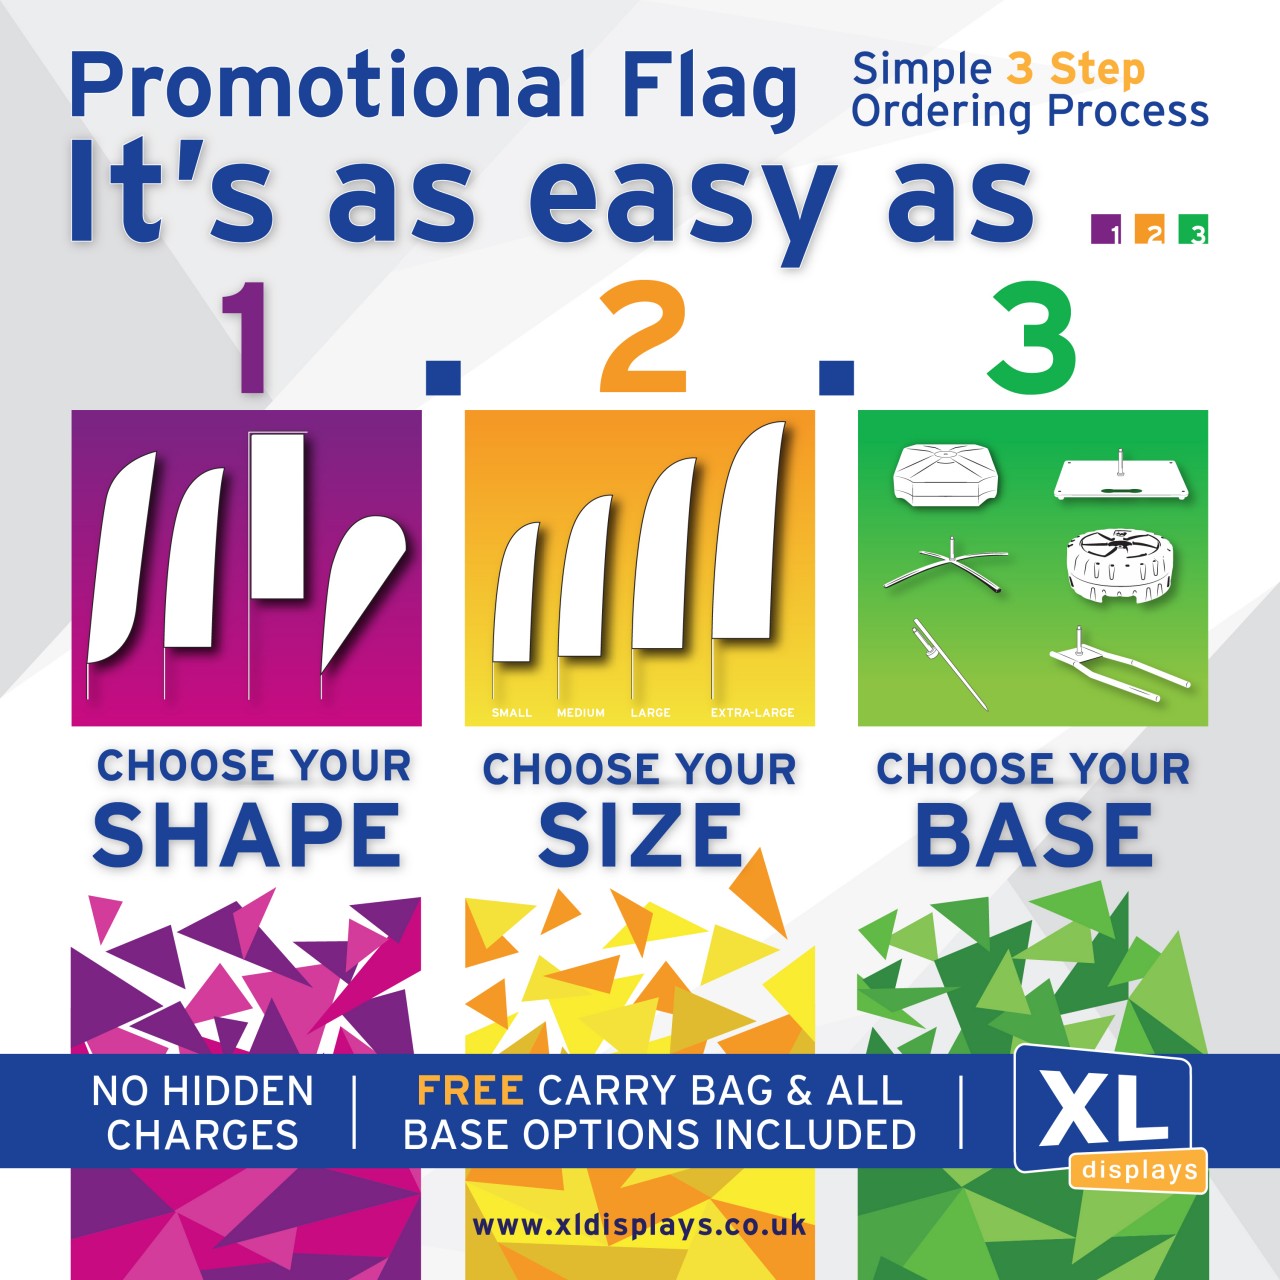 Promotional Flags 3 Step Buying Process by XL Displays